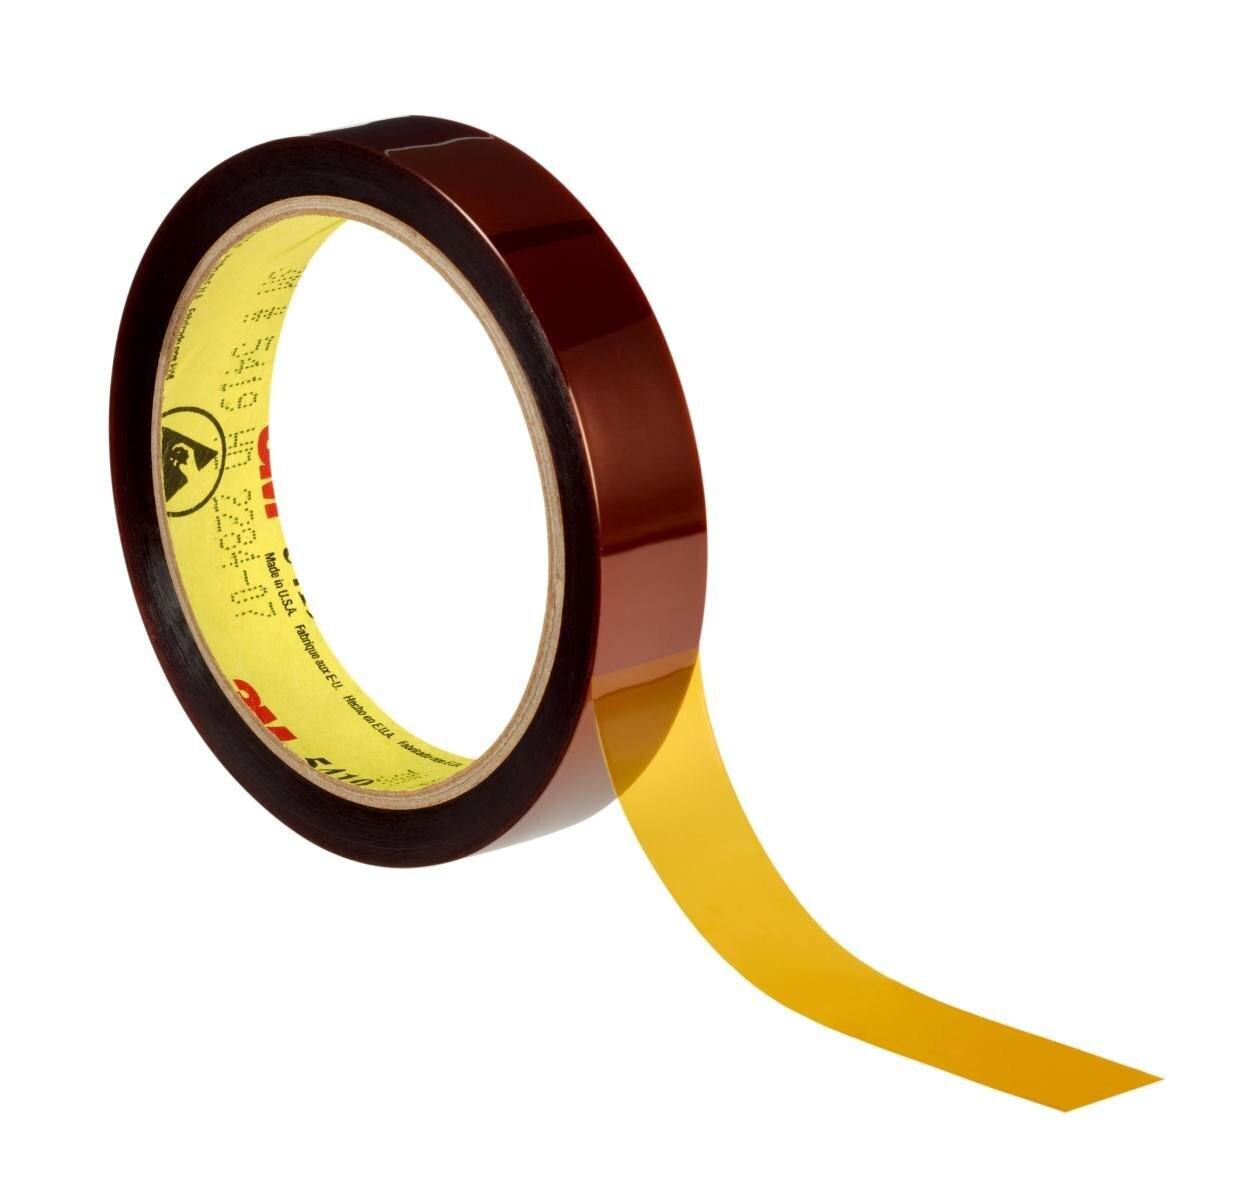 3M High Temperature Polyimide Adhesive Tape 5419, ruskea, 19 mm x 33 m, 68,58 µm.